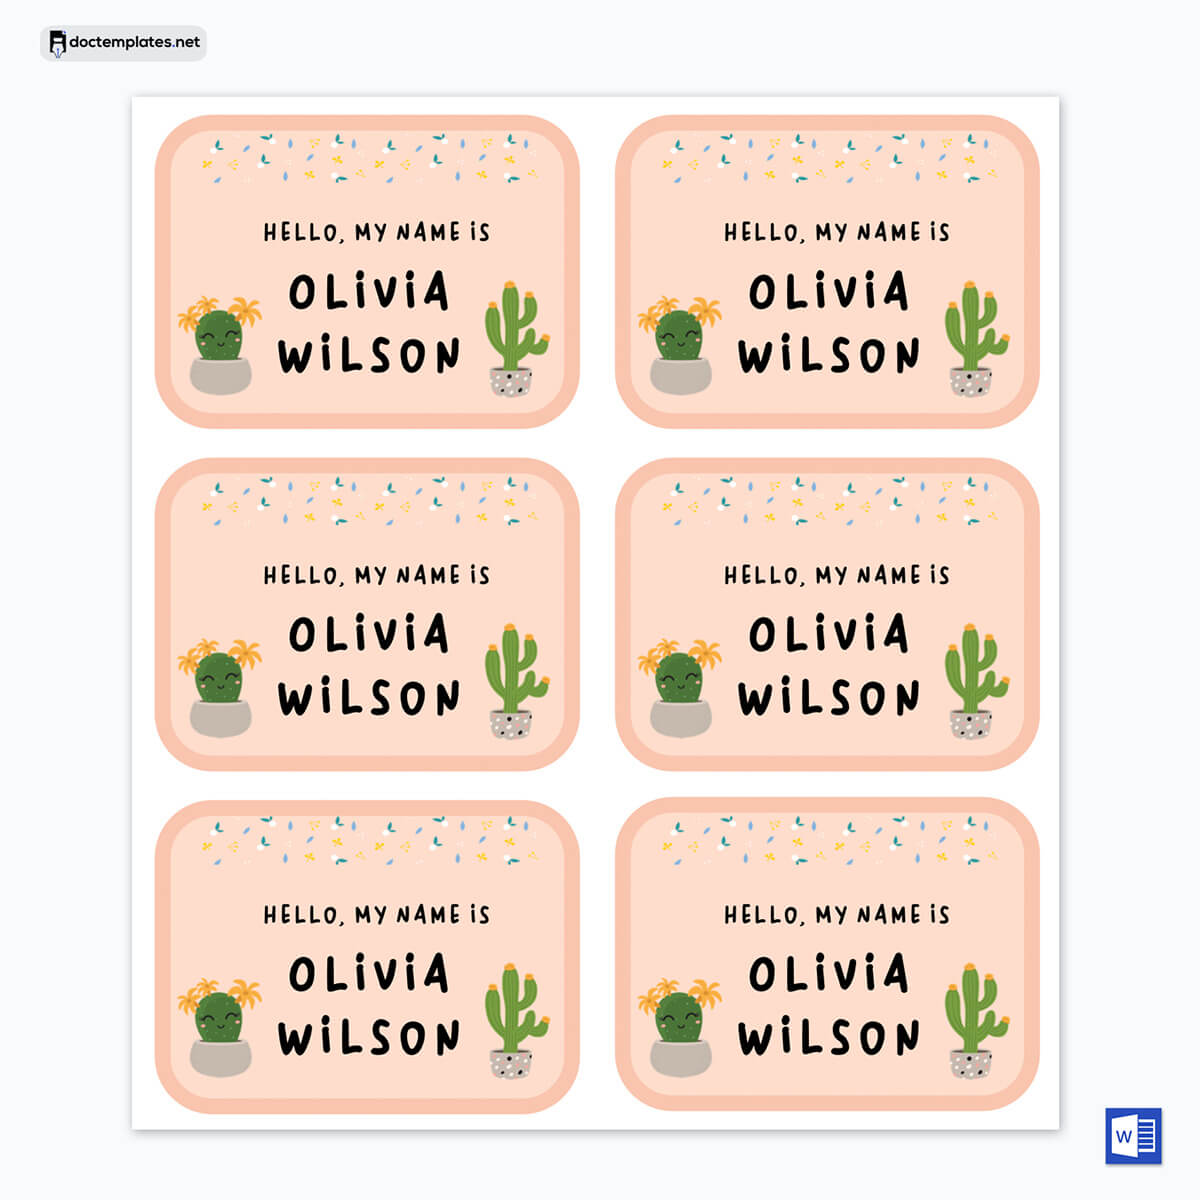 "Print-Ready Avery Name Tag Template with 20 Editable Samples"